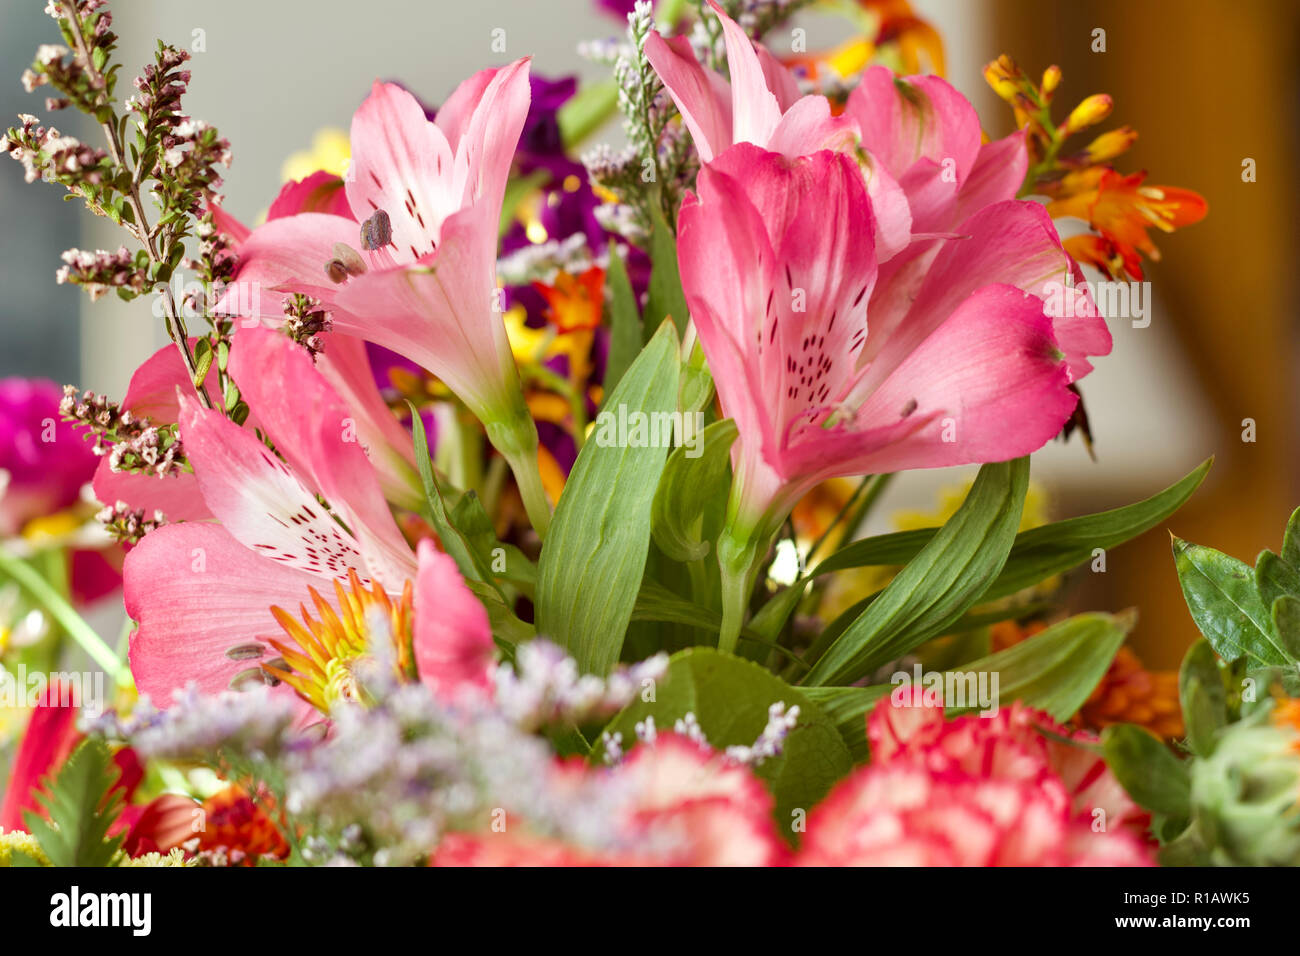 Close up view of beautiful pink Peruvian lily flowers in an indoor floral arrangement Stock Photo